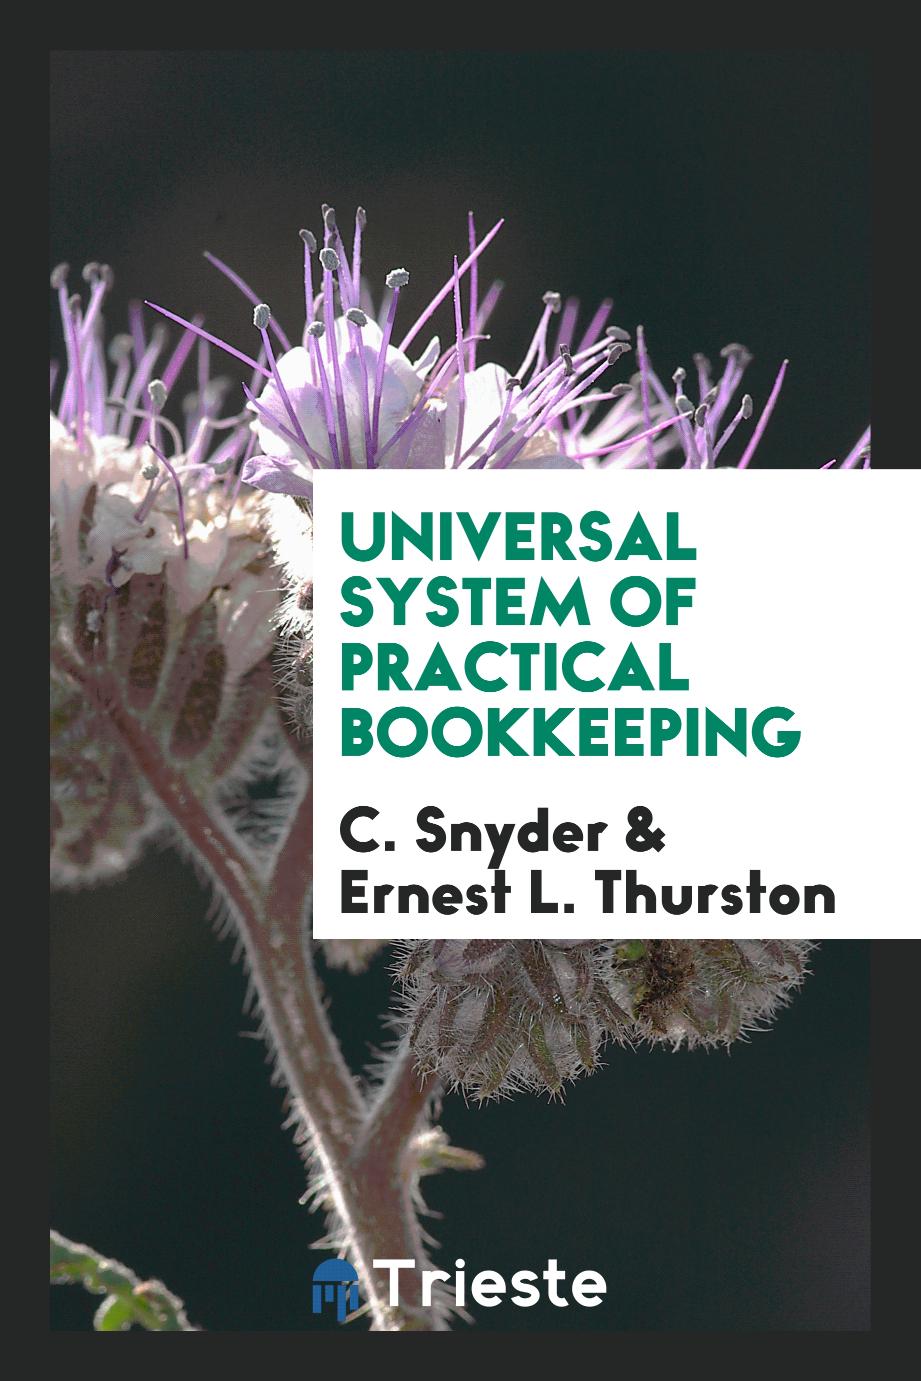 Universal System of Practical Bookkeeping